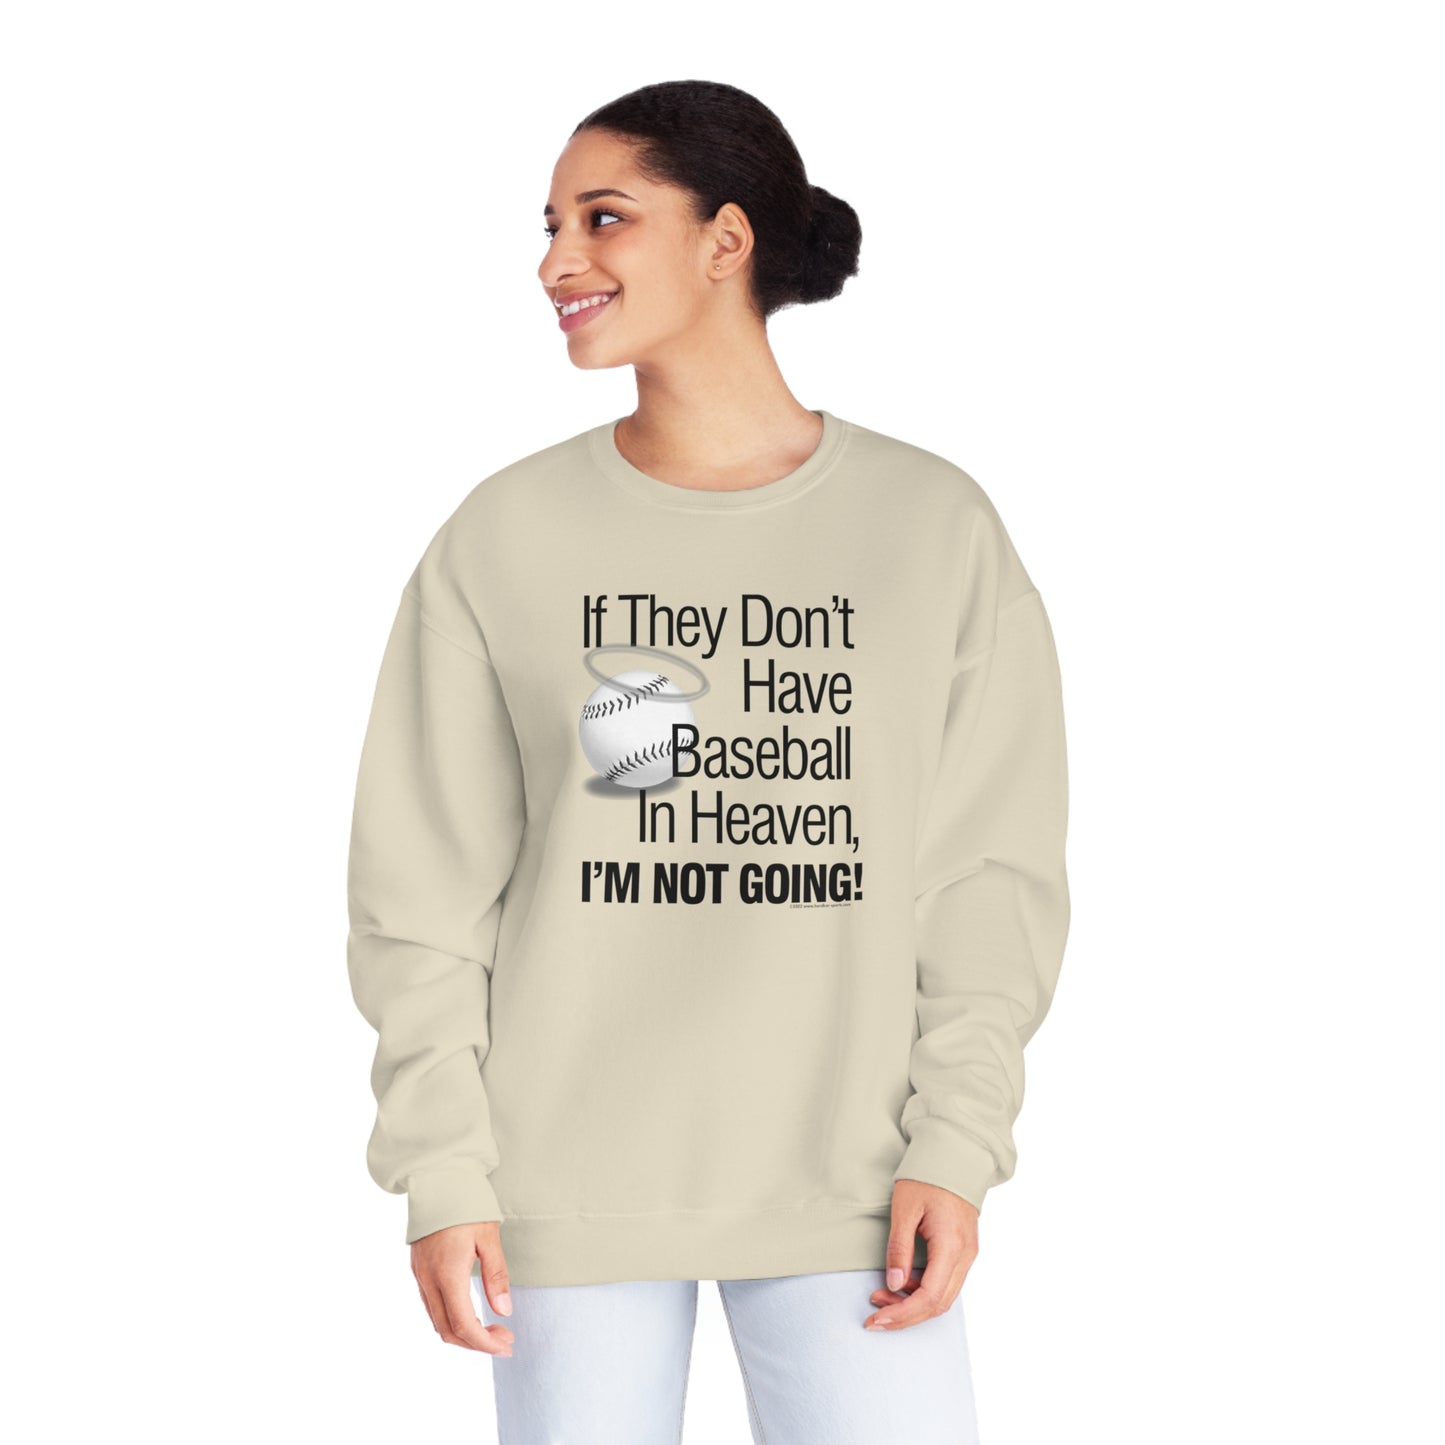 If they Don't Have Baseball in Heaven I'm Not Going Crewneck Sweatshirt, Funny Baseball Crew sweatshirt, baseball humor, love baseball